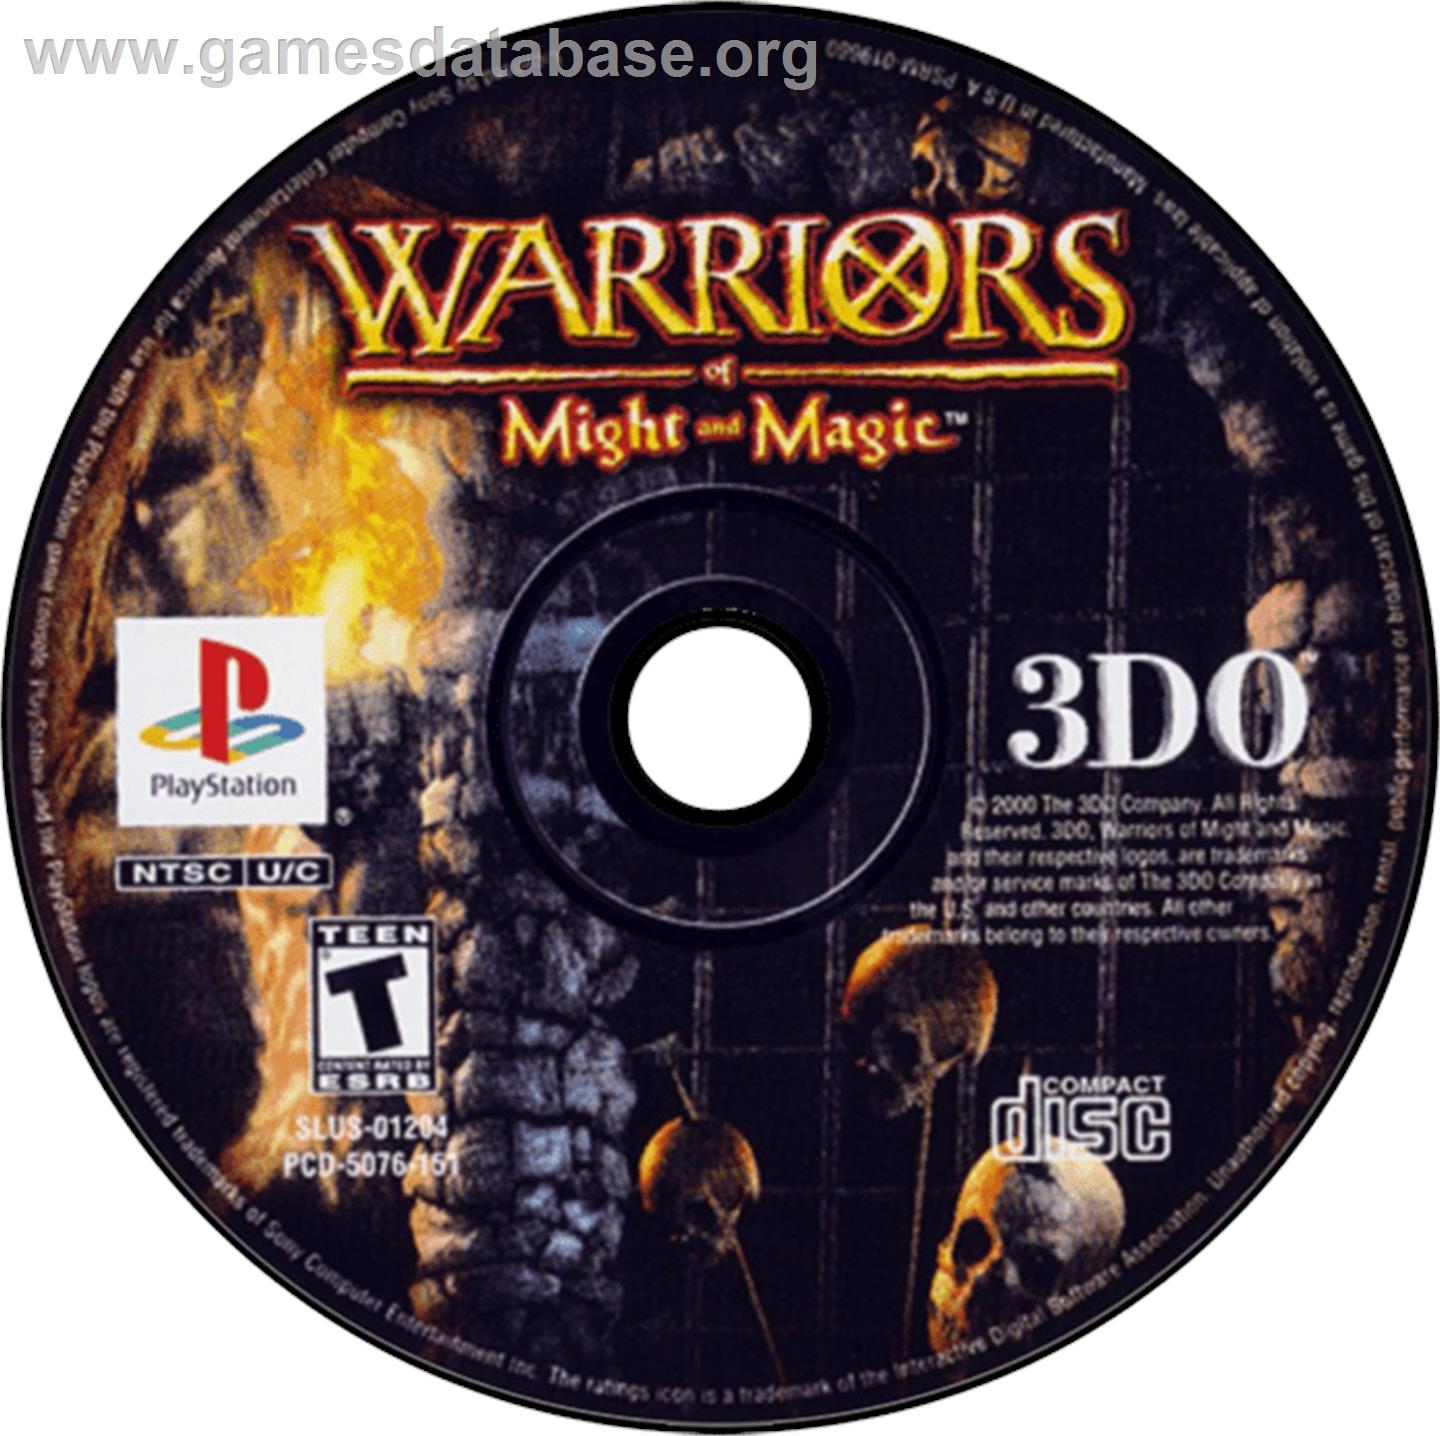 Warriors of Might and Magic - Sony Playstation - Artwork - Disc